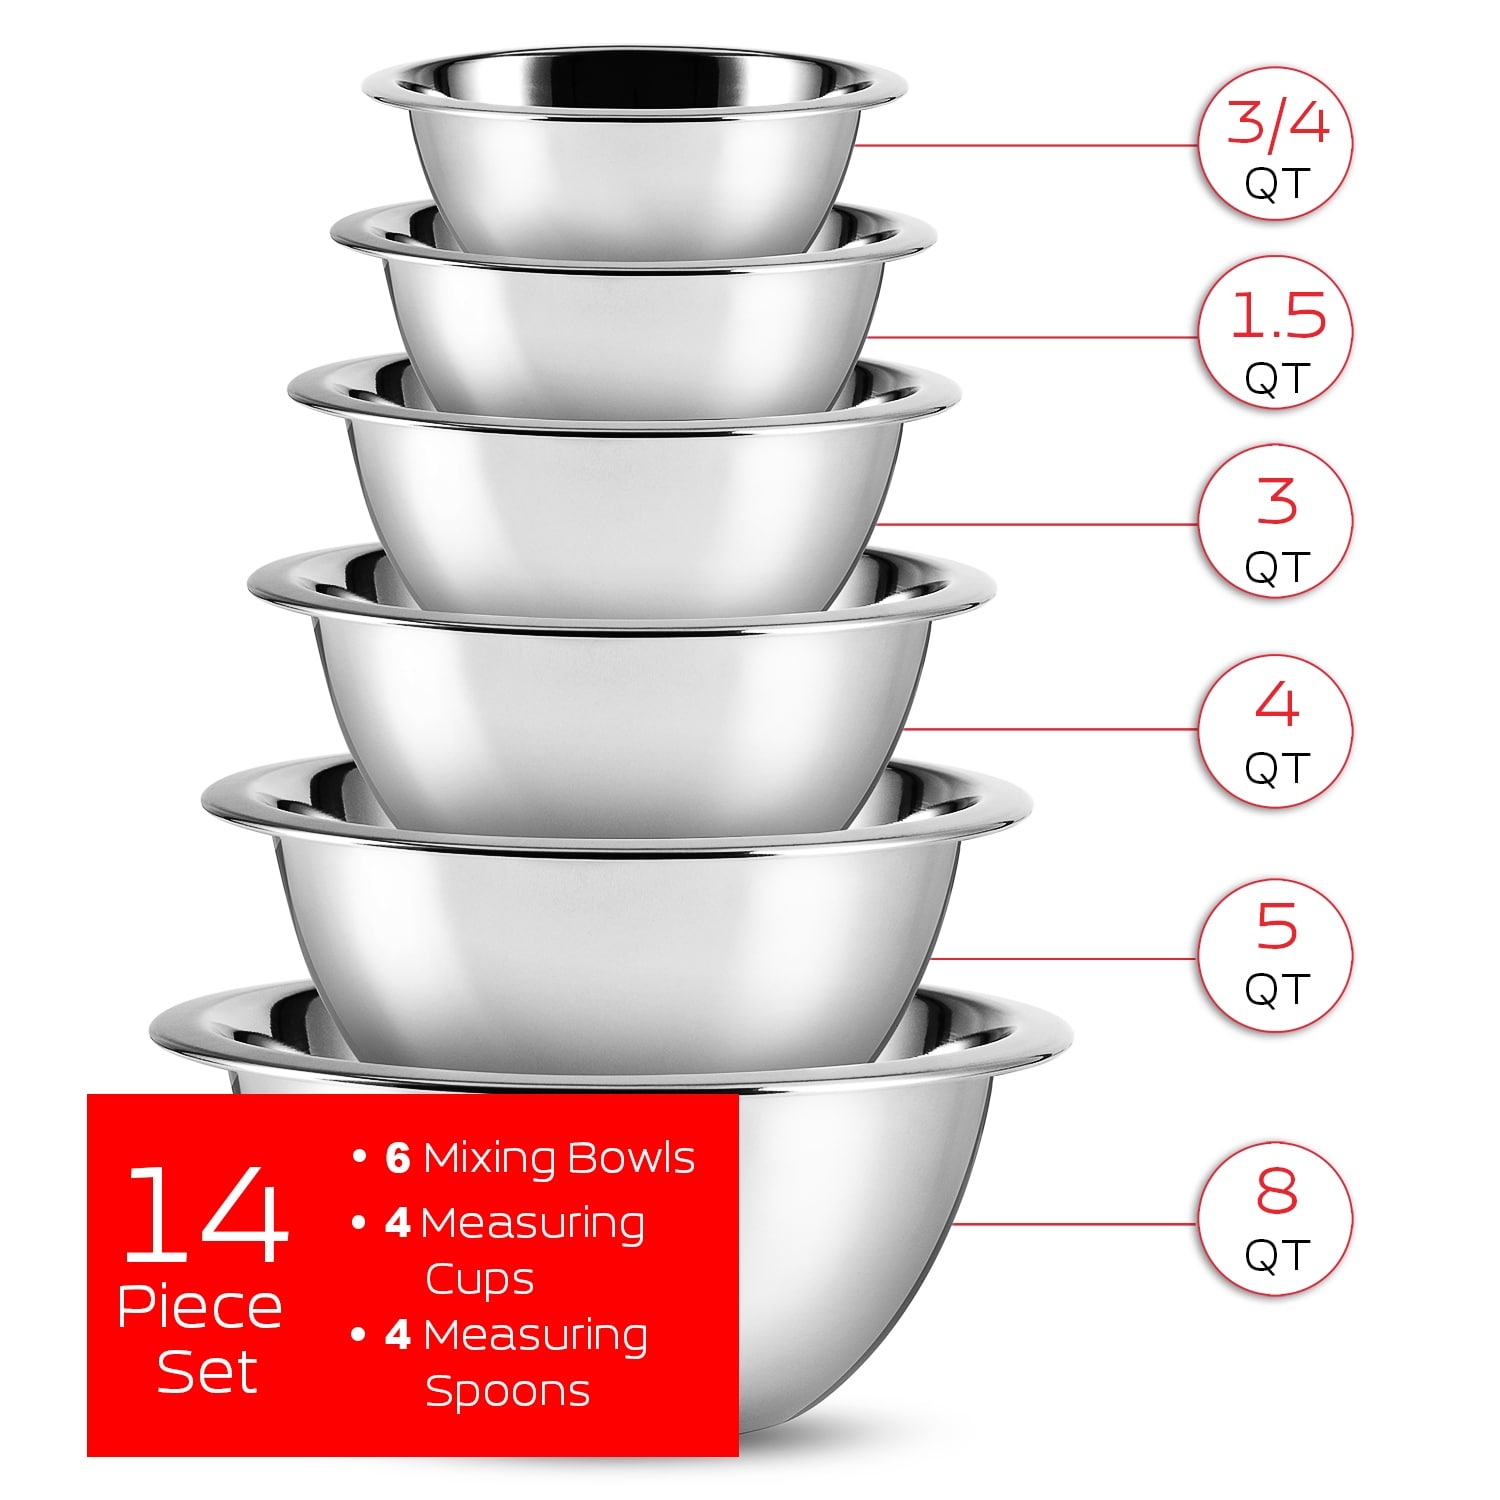 https://ak1.ostkcdn.com/images/products/is/images/direct/0614de65c117fe95140a5b848fba192ff19f0198/Joytable-Premium-Stainless-Steel-Mixing-Bowl%2C-Measuring-Cups%2C-and-Spoon-Set.jpg